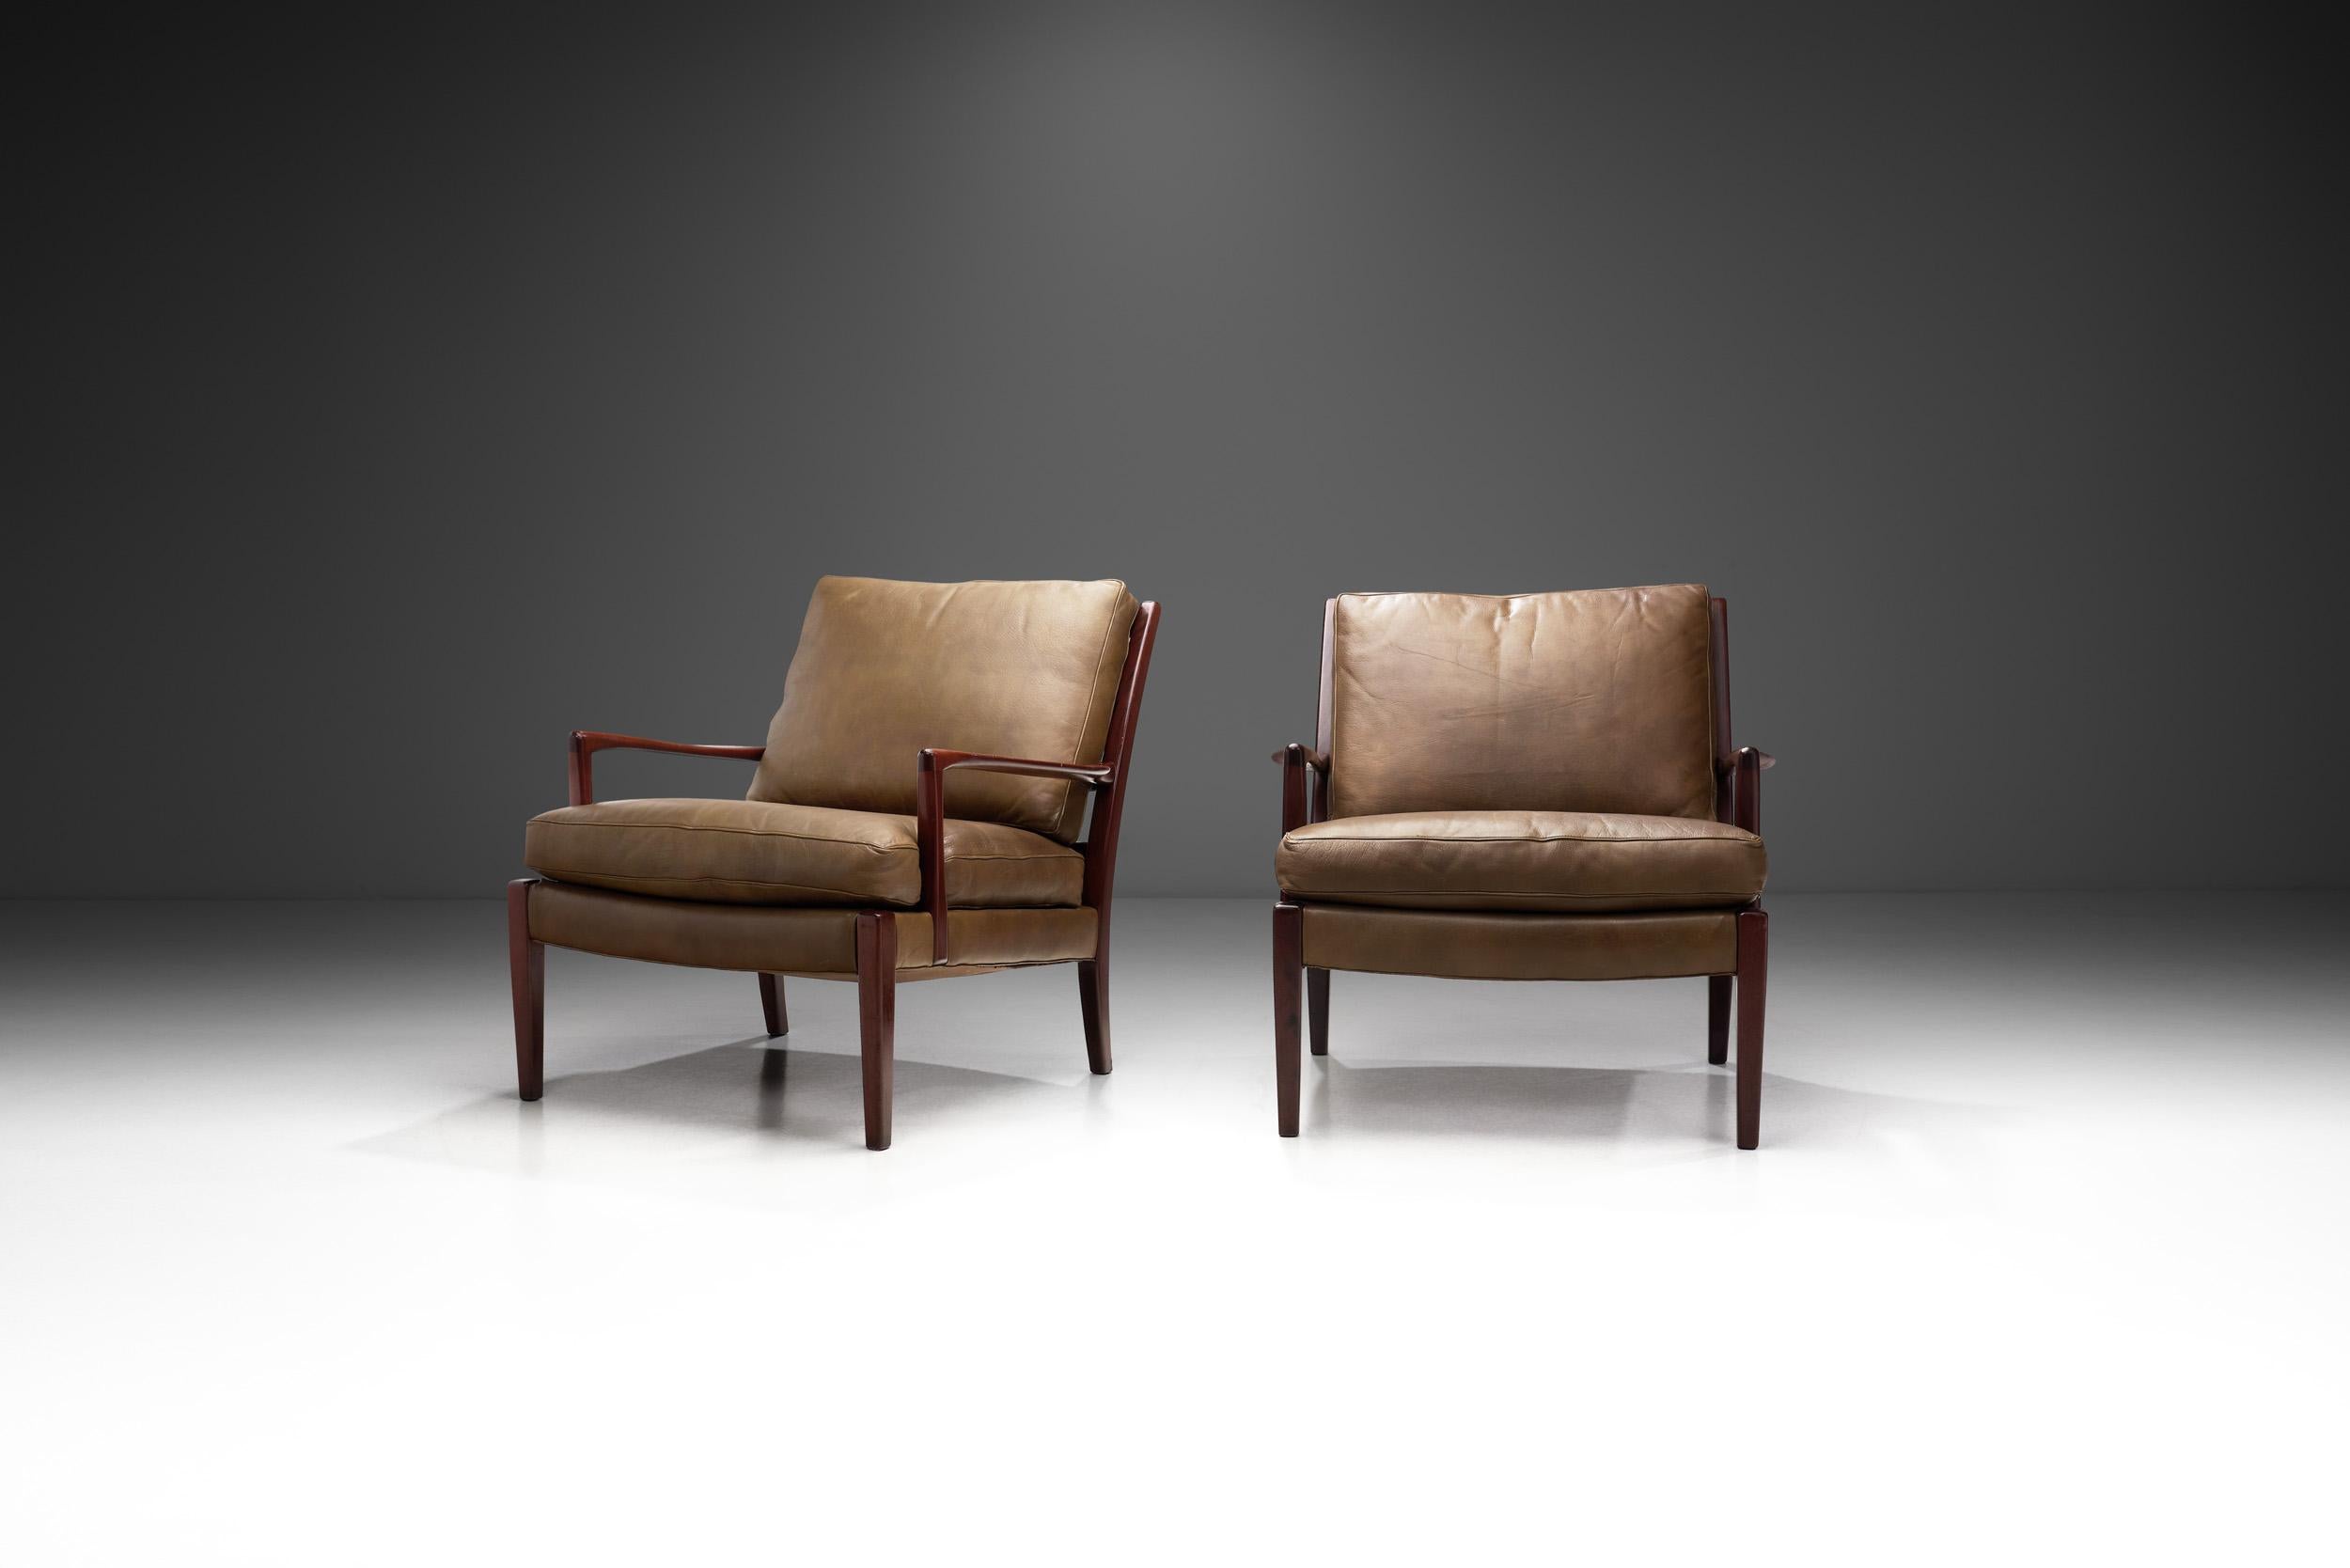 Swedish designer, Arne Norell’s conceptual designs gained recognition for their usage of traditional materials and forms like leather and wood combined with simple and vanguard lines. This pair of “Löven” chairs was designed by Arne Norell in 1964